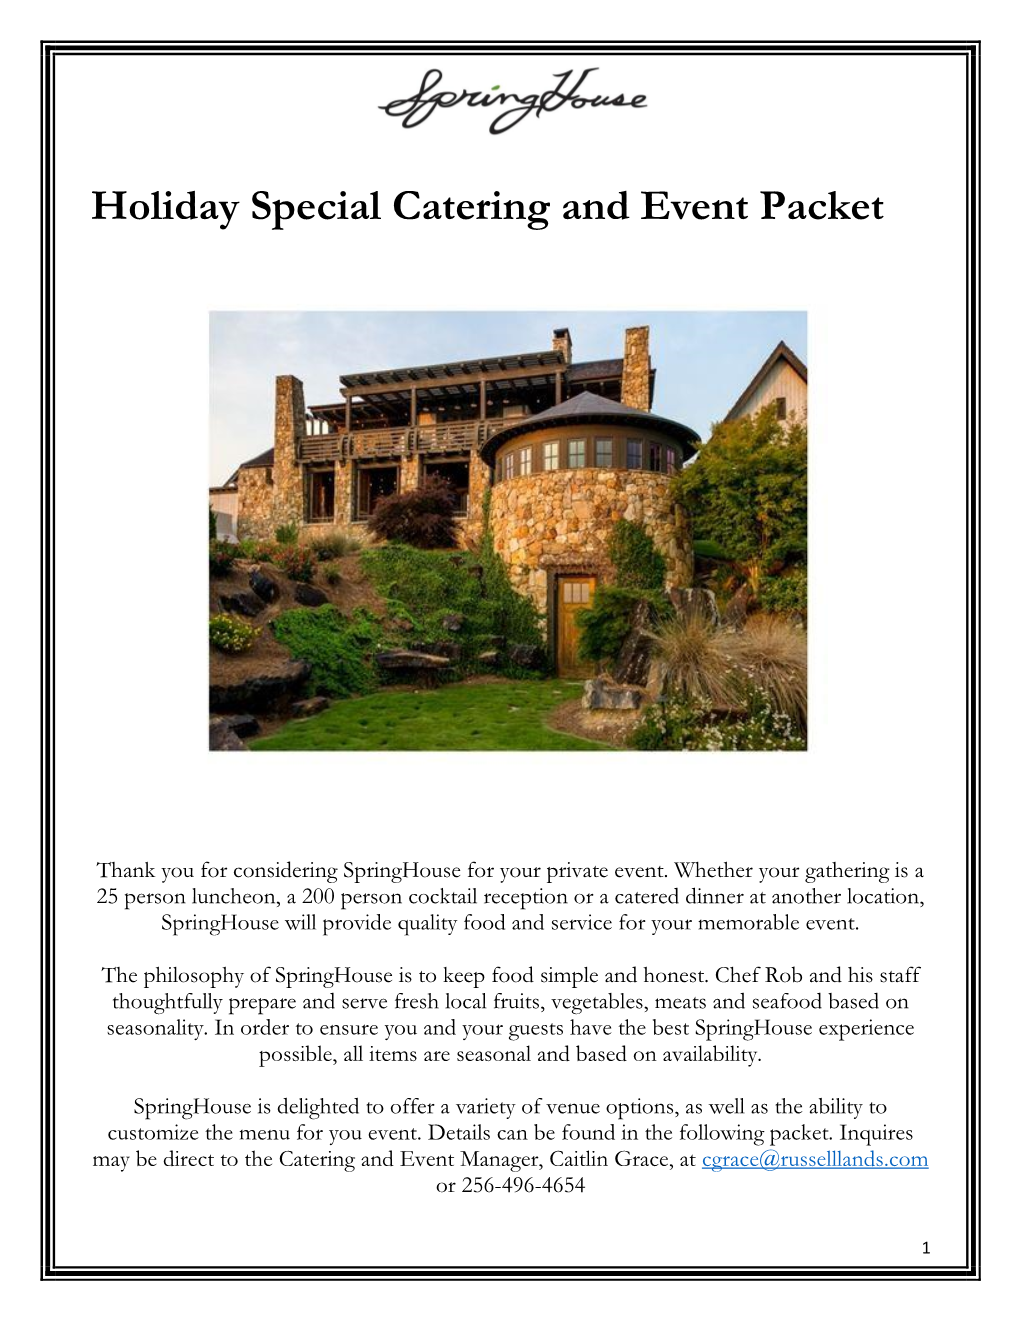 View the Holiday Catering Packet